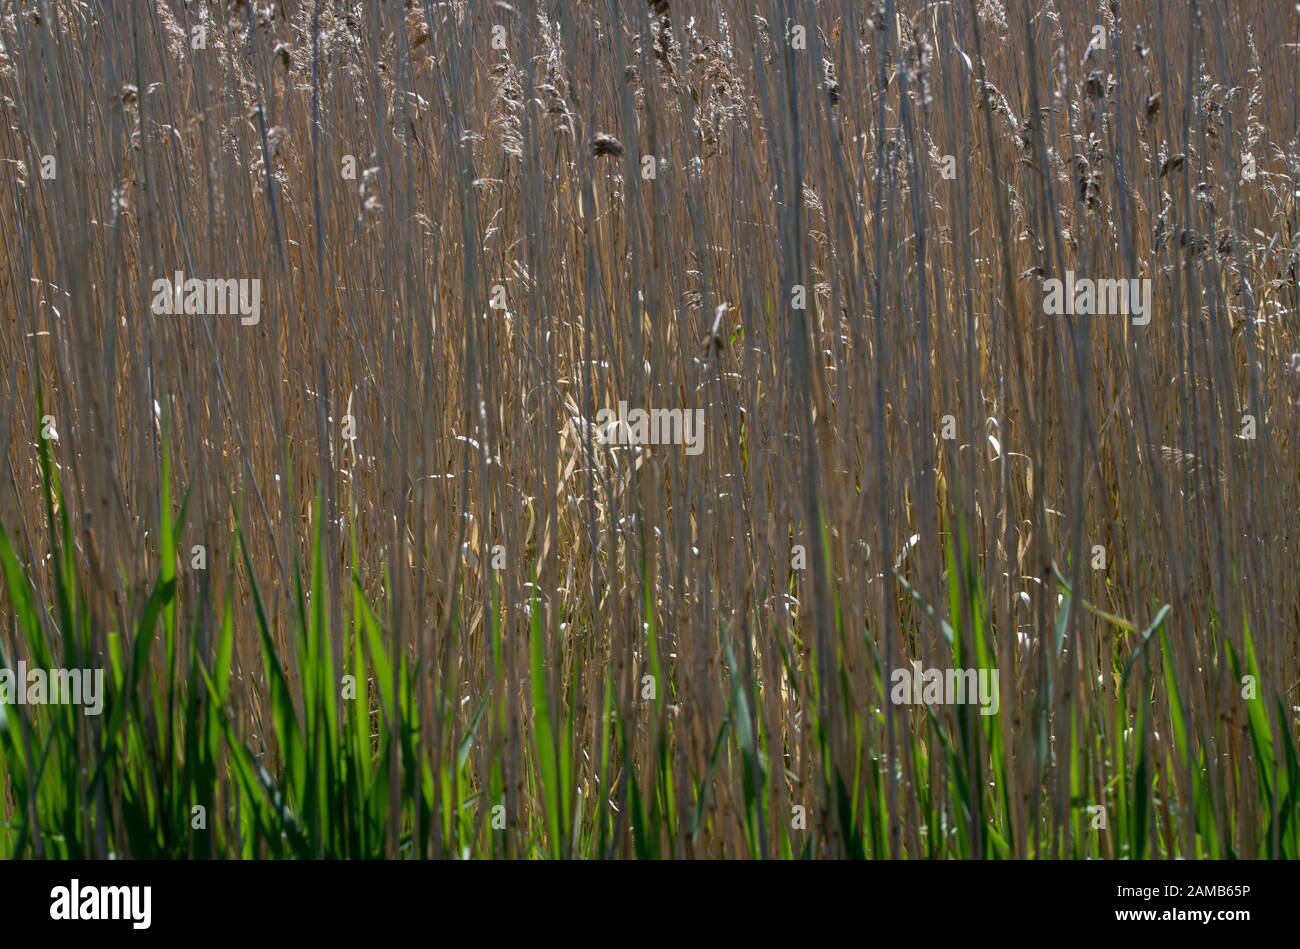 Sun catching new green shoots against a background of reeds at edge of water margin Stock Photo